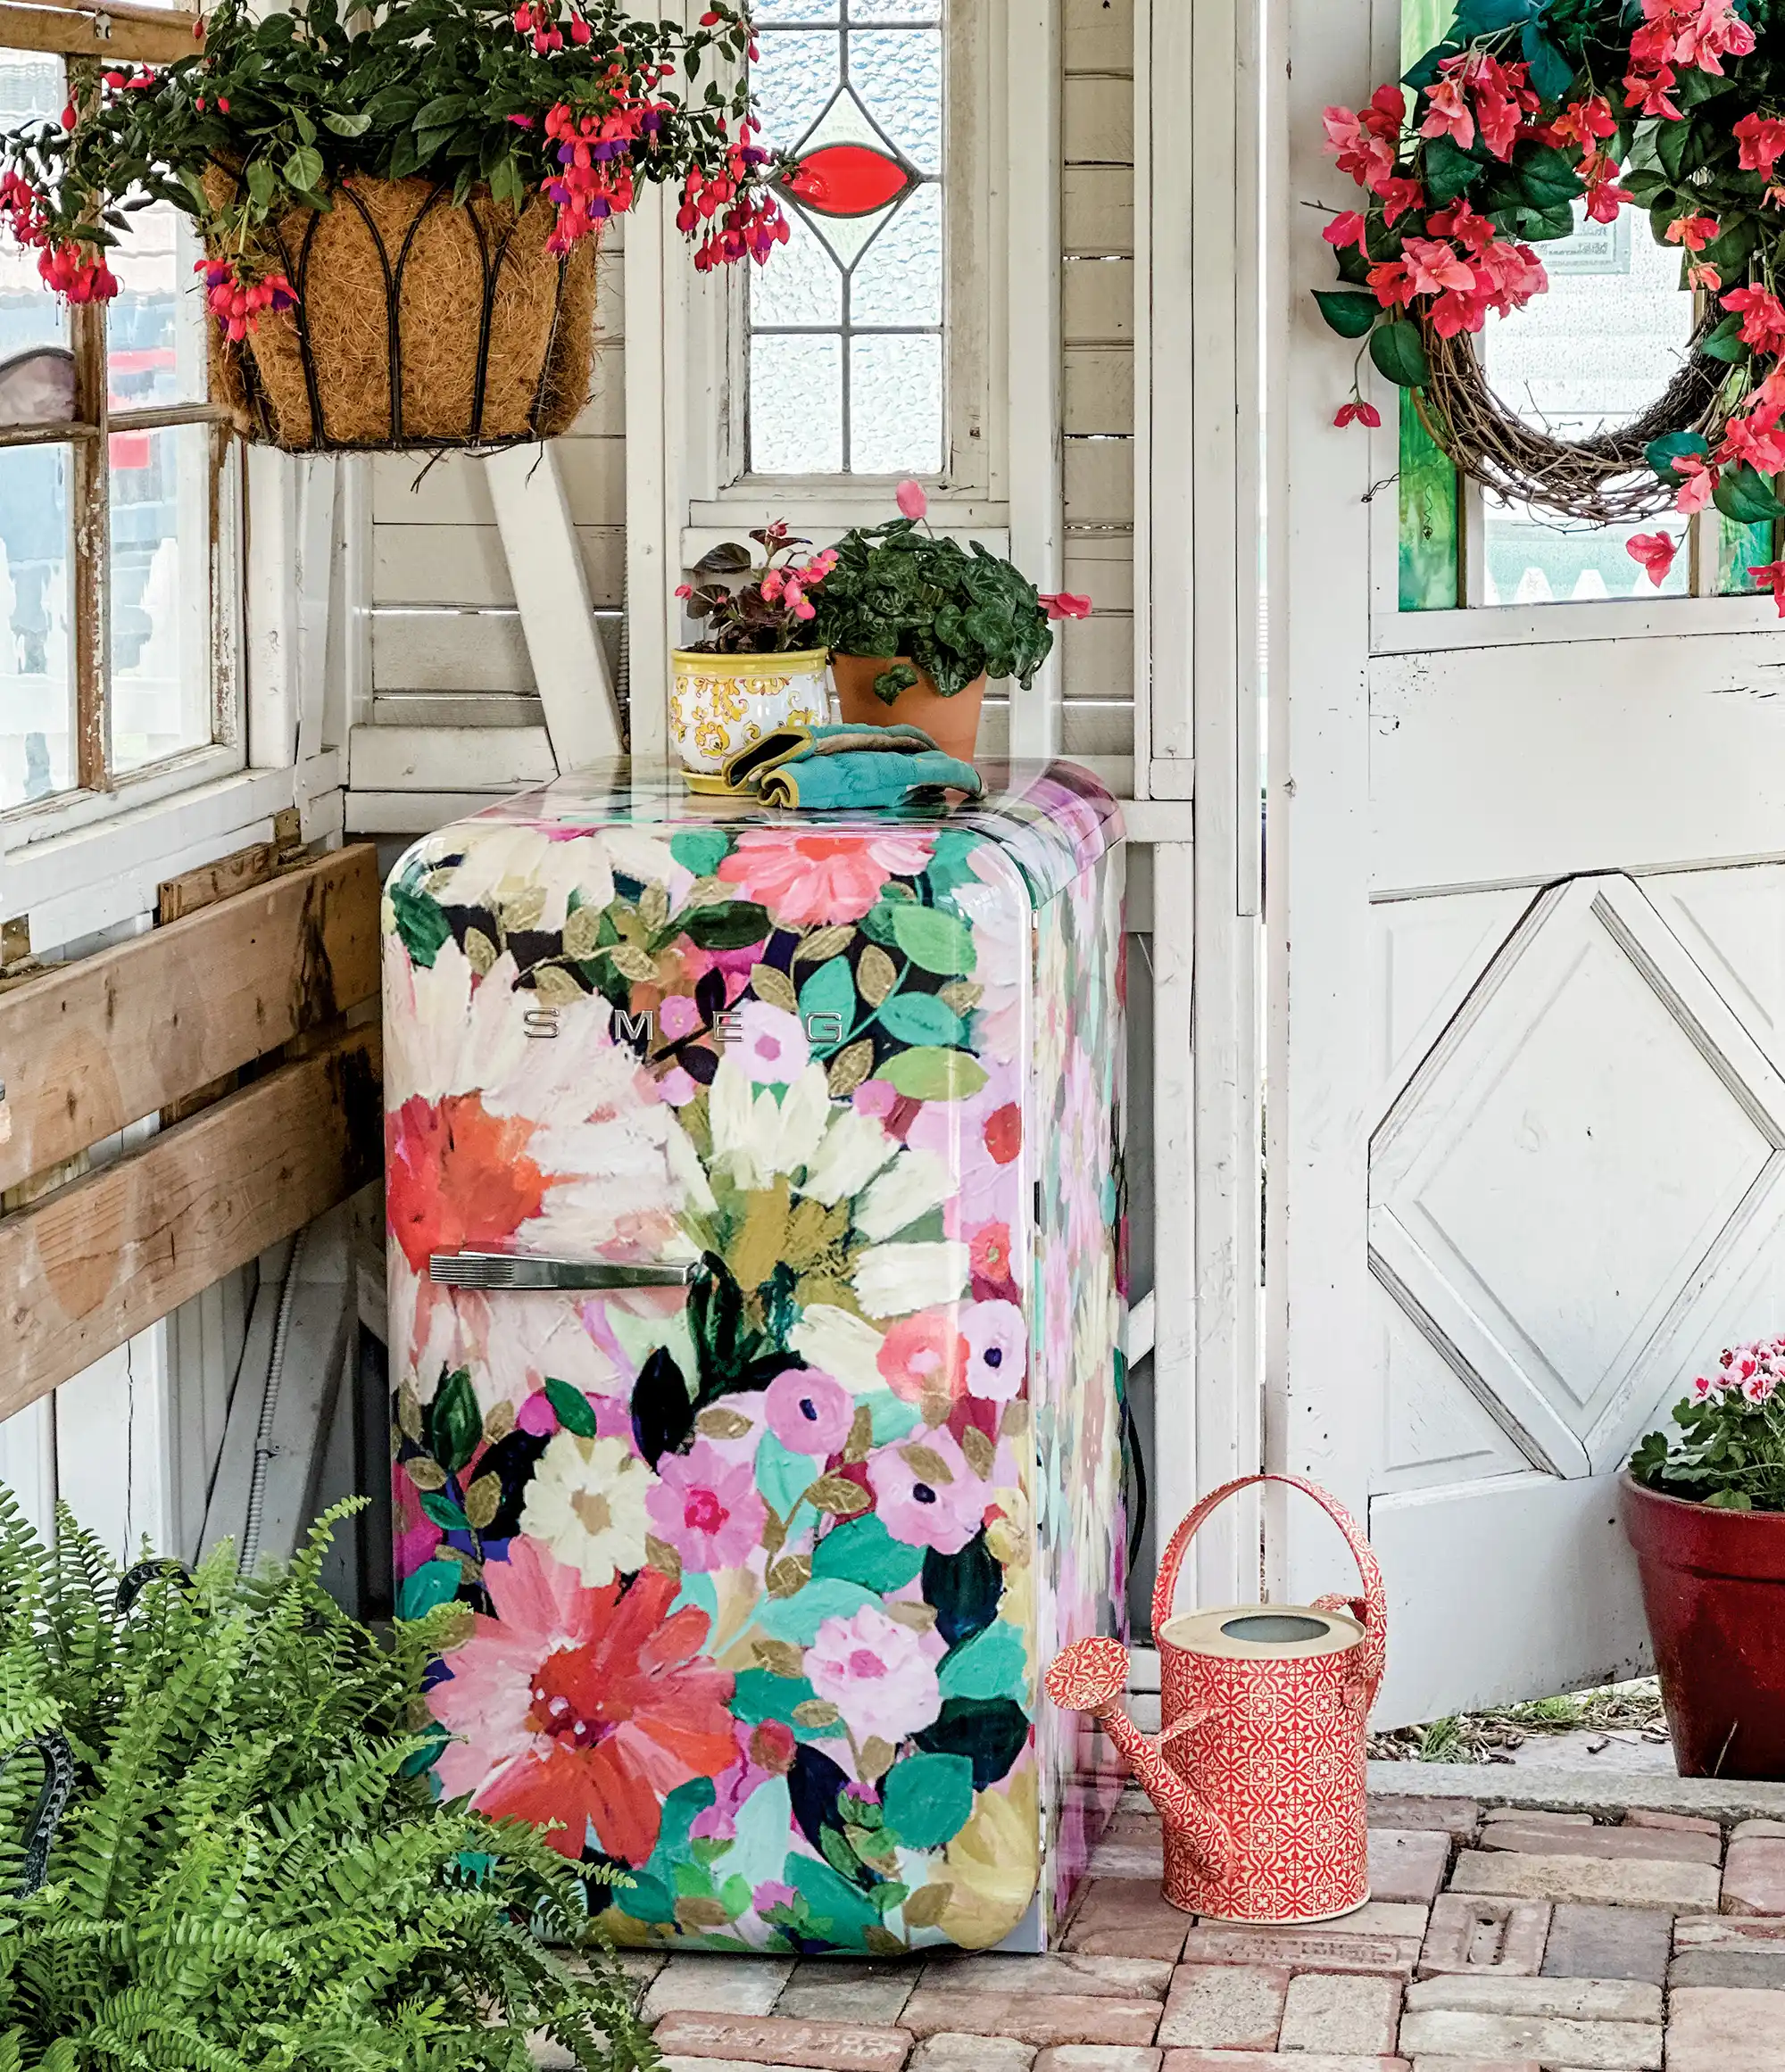 SMEG Floral refrigerator in garden with hanging flowers and watering can